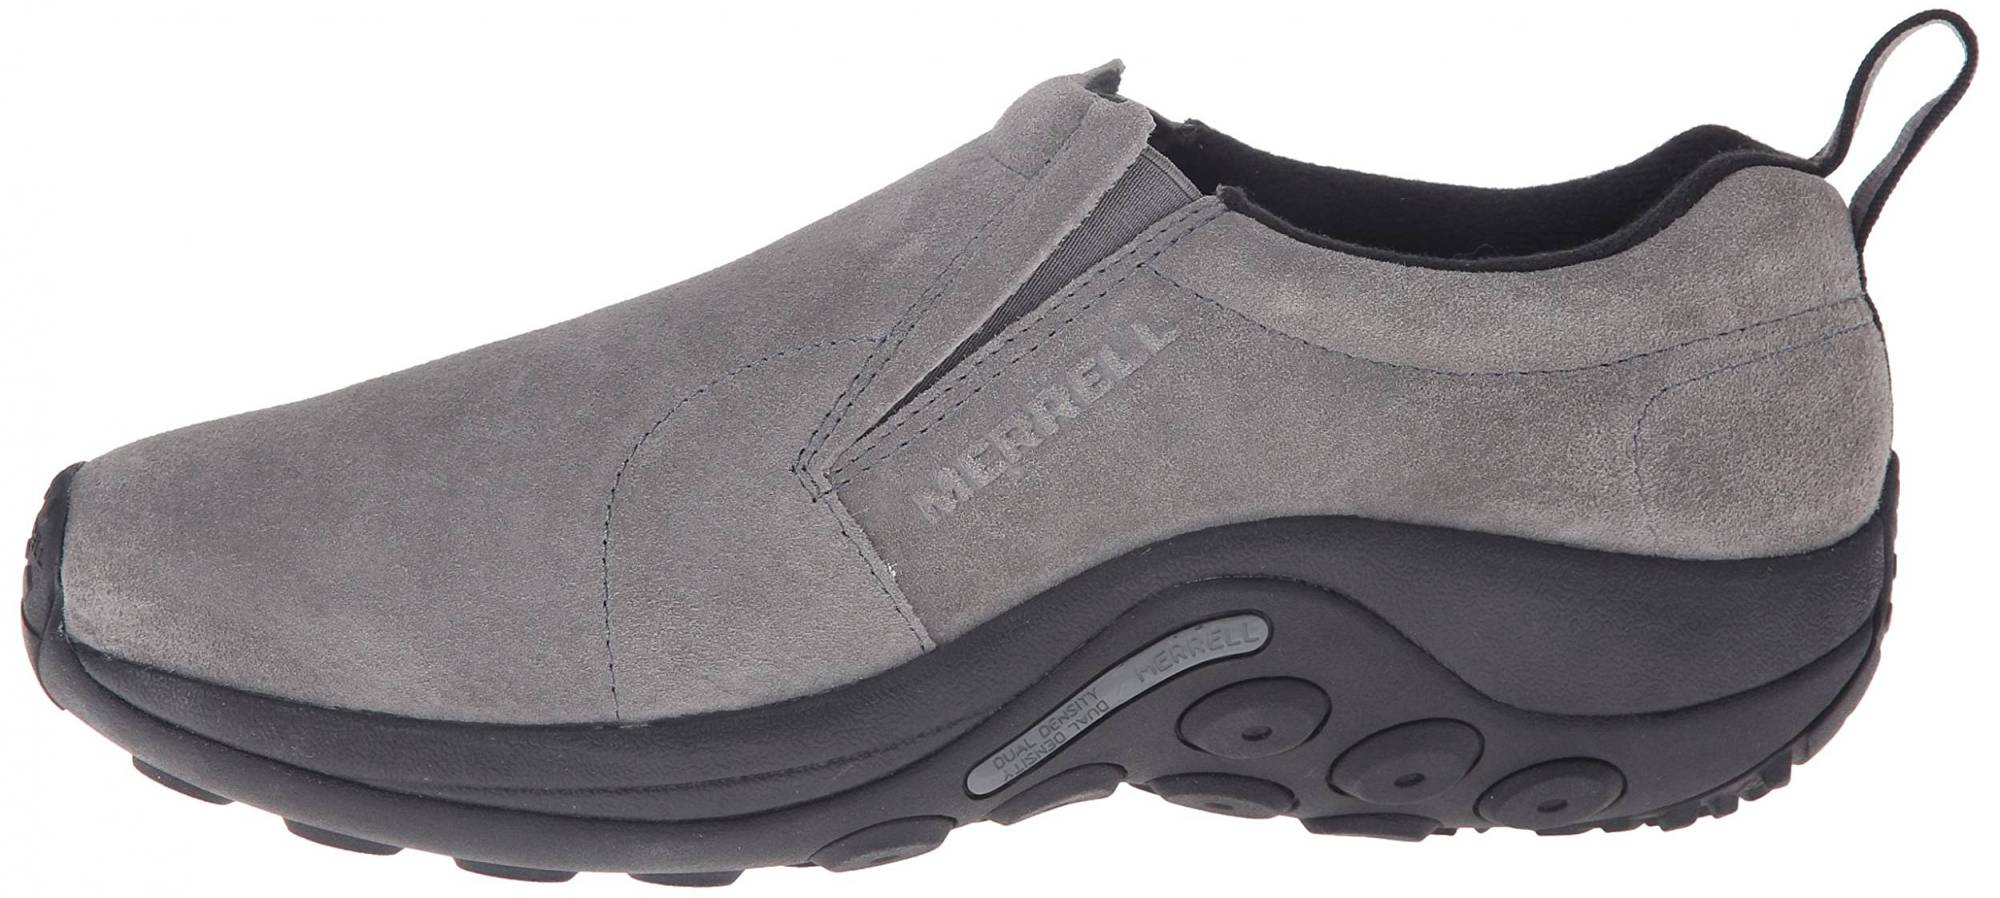 Merrell Jungle Moc – Shoes Reviews & Reasons To Buy